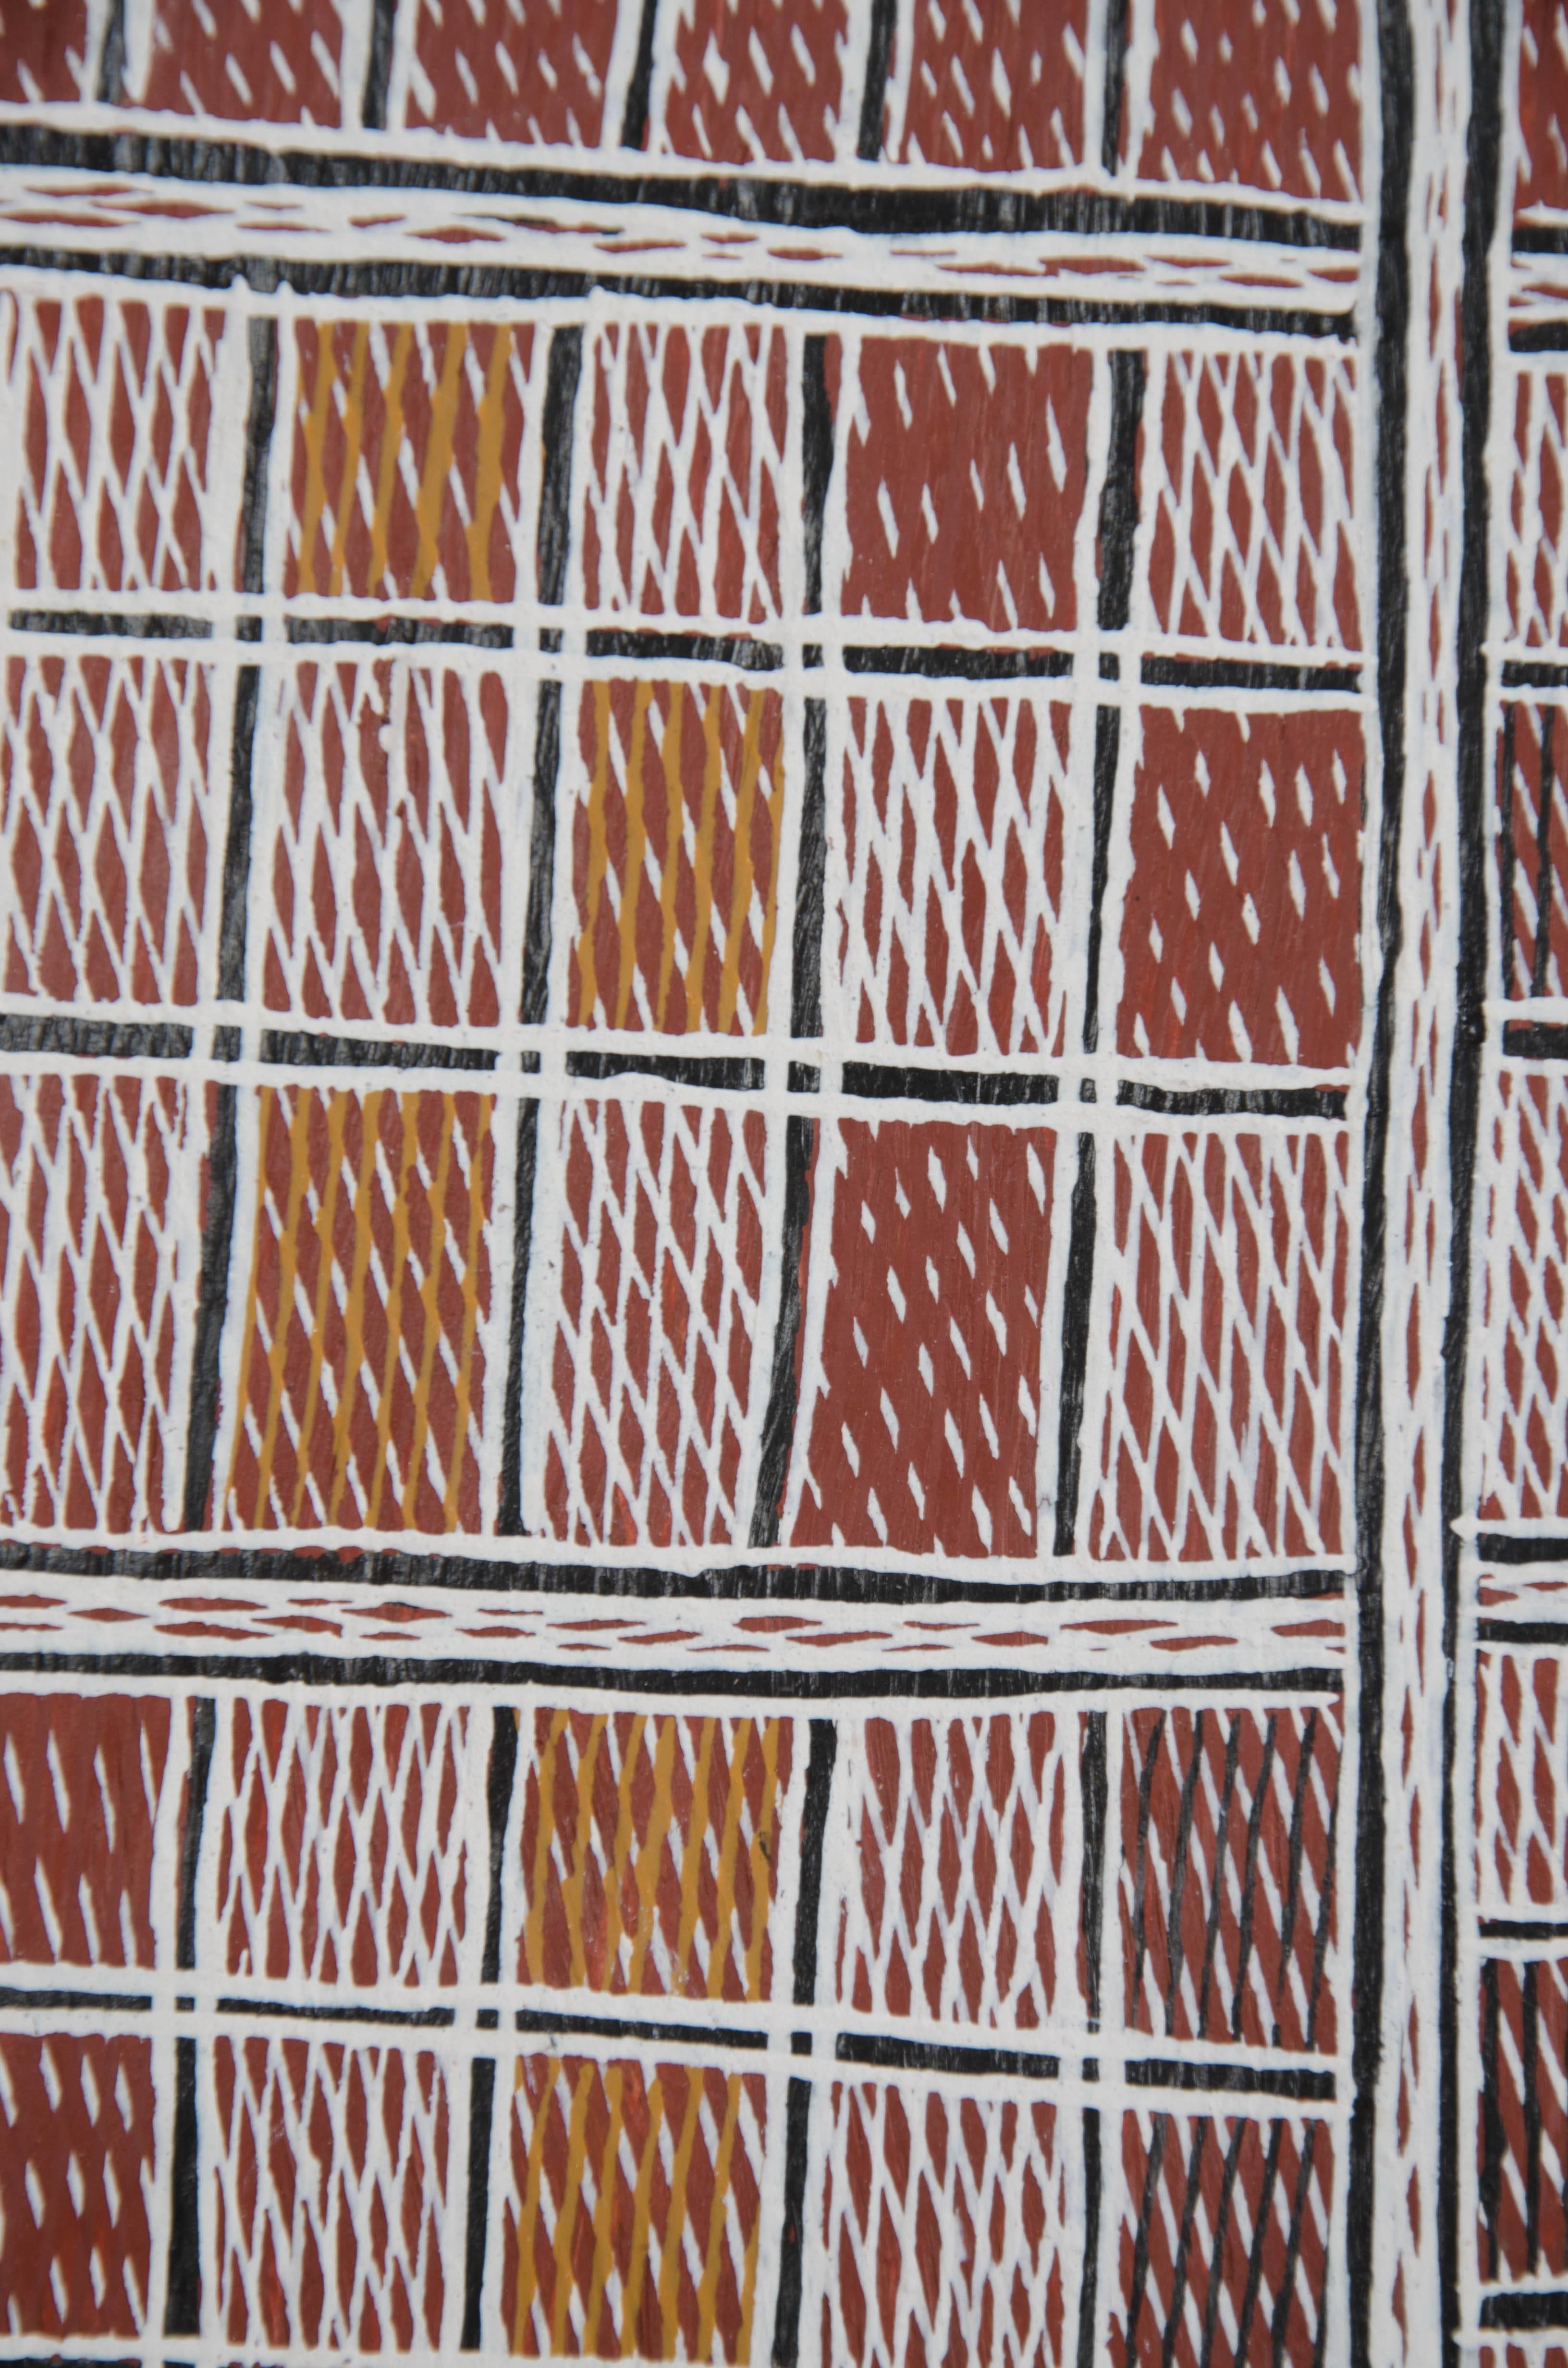 This exquisite painting, executed in natural ochres on dried bark, comes from the Arnhem land area of Northern Australia. The bark painting tradition stretches back thousands of years. Read more about it here: http://bit.ly/1HMTZdy

The work is